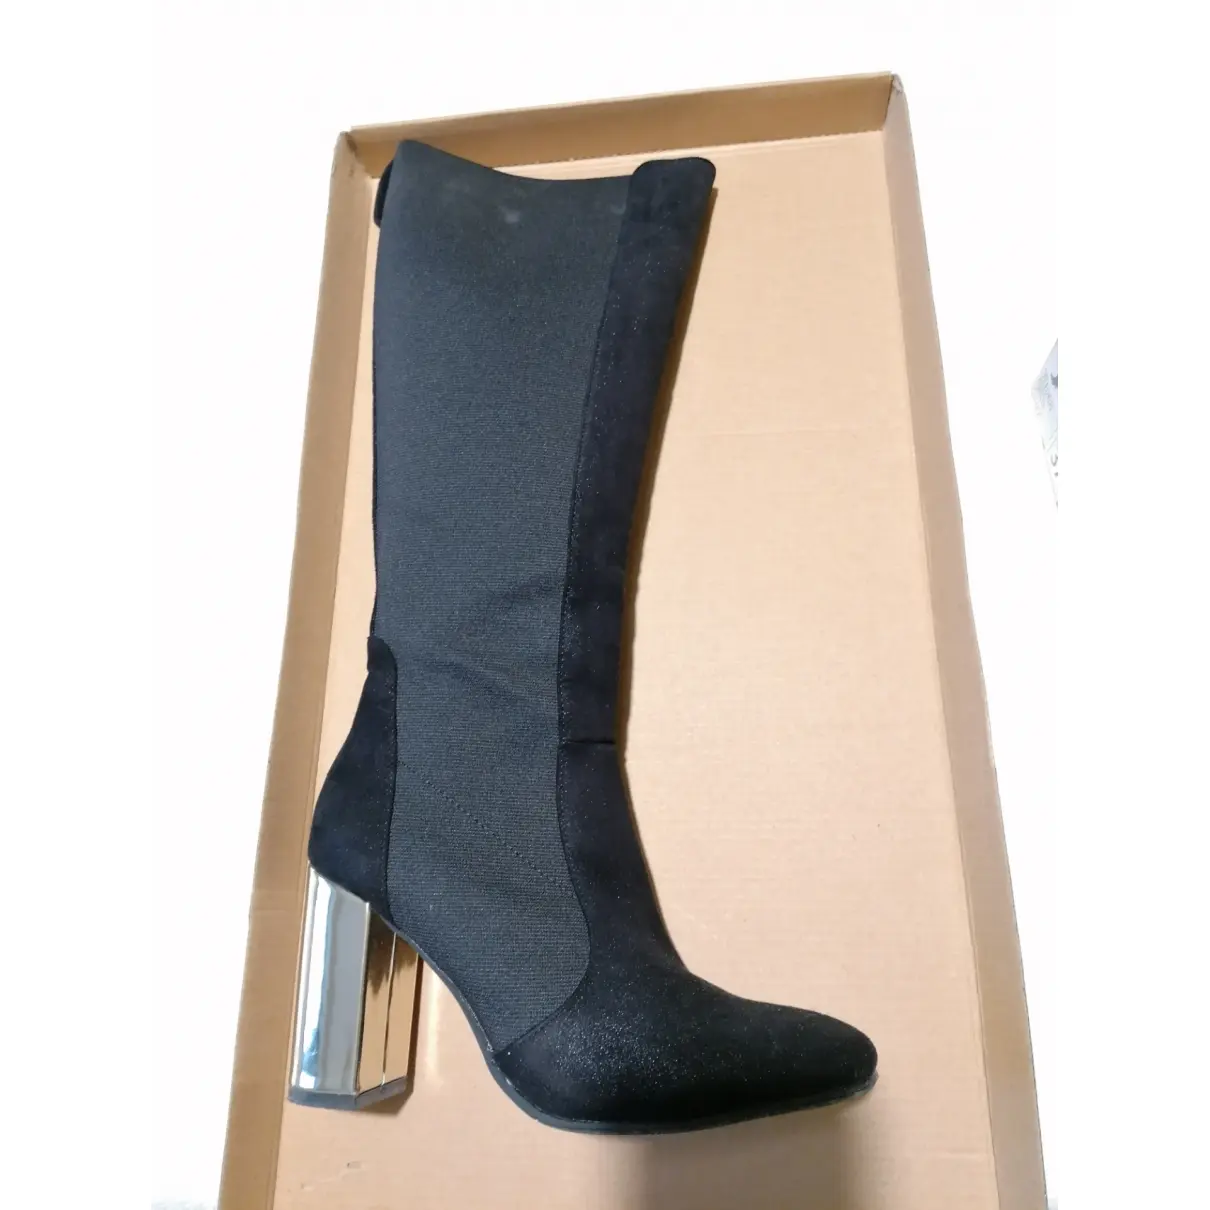 Buy Gioseppo Boots online